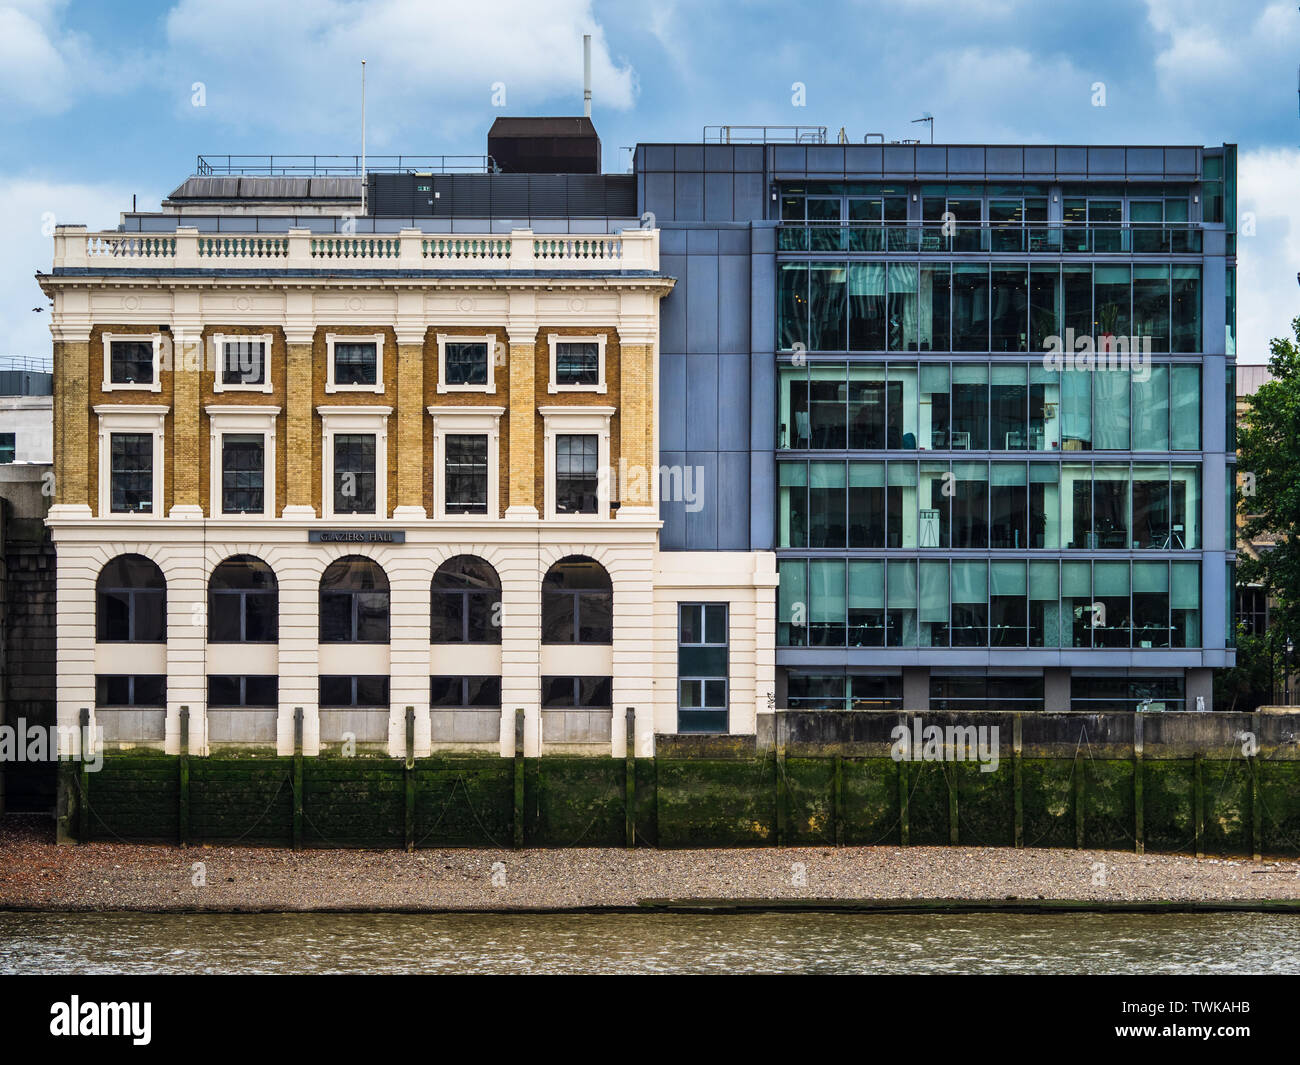 Glaziers Hall Southwark London - conference and events venue in a C19th former dockside warehouse on the banks of the River Thames in Central London Stock Photo